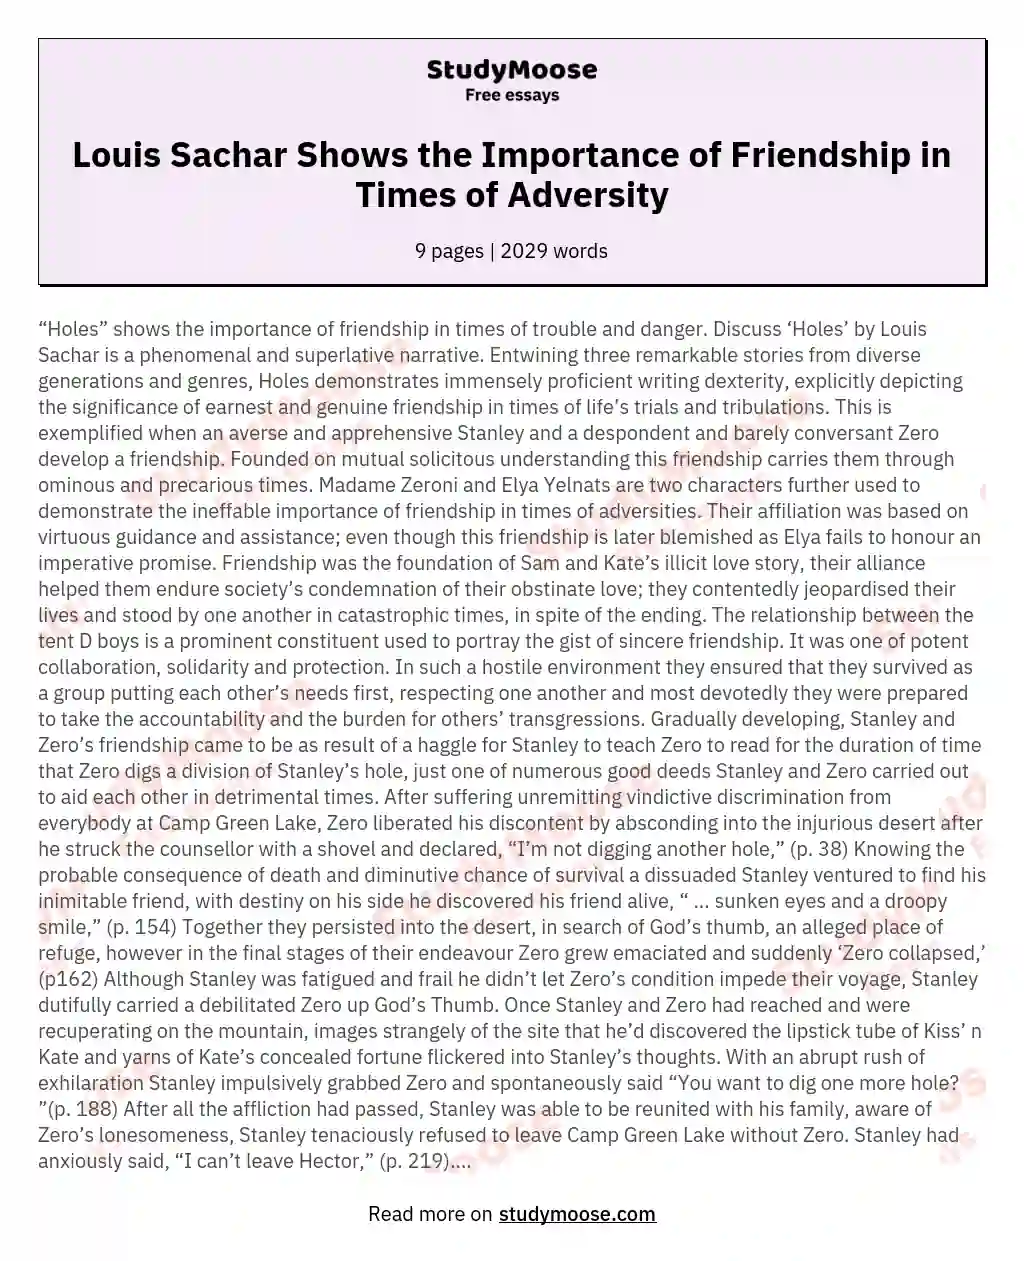 Louis Sachar Shows the Importance of Friendship in Times of Adversity